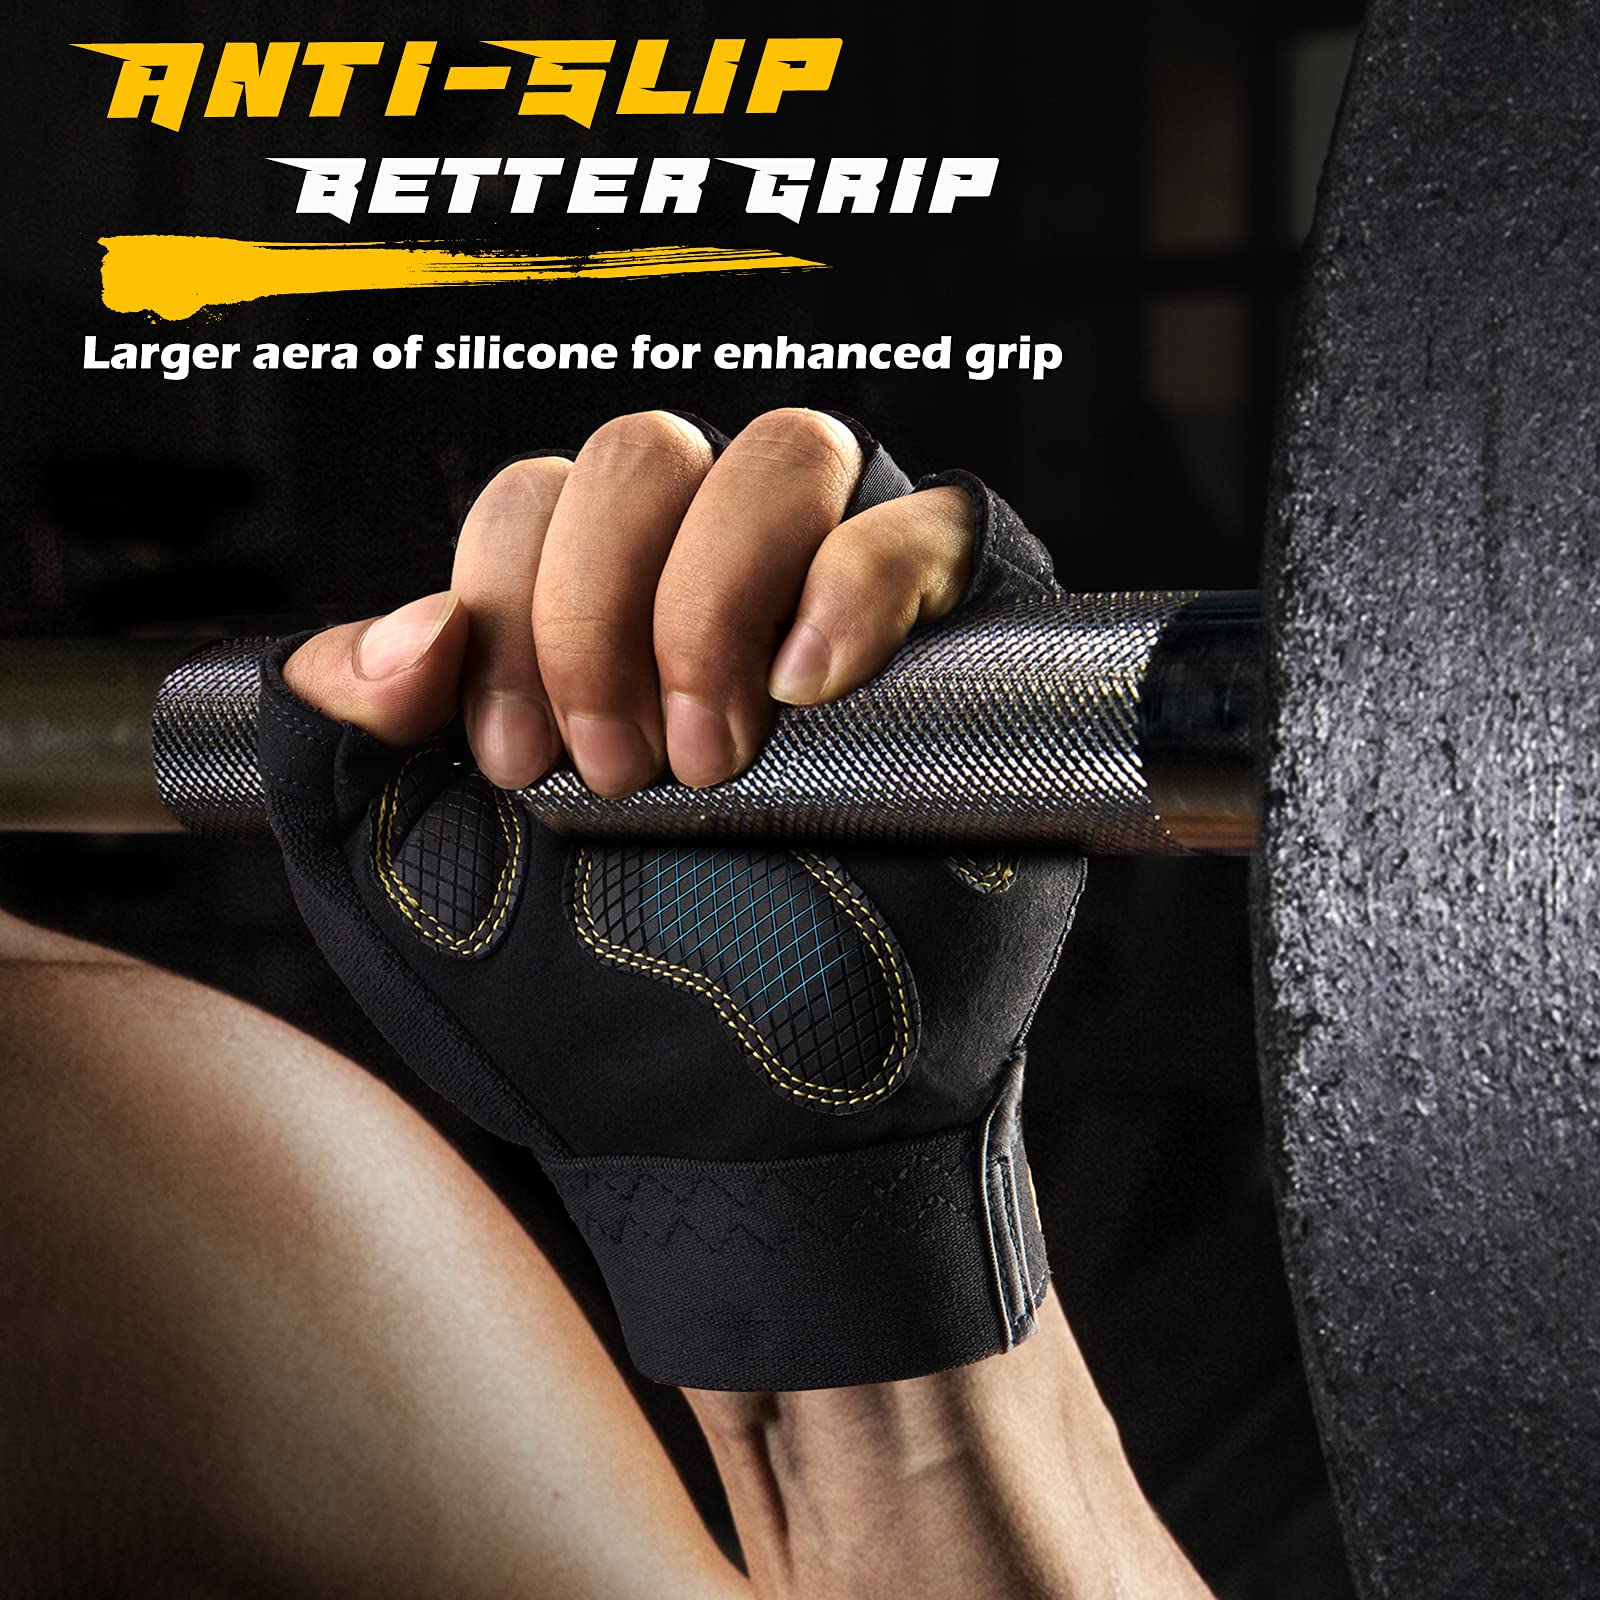 FREETOO Workout Gloves for Men 2021 Latest, [Full Palm Protection] [Ultra Ventilated] Weight Lifting Gloves with Cushion Pads and Silicone Grip Gym Gloves Durable Training Gloves for Exercise Fitness